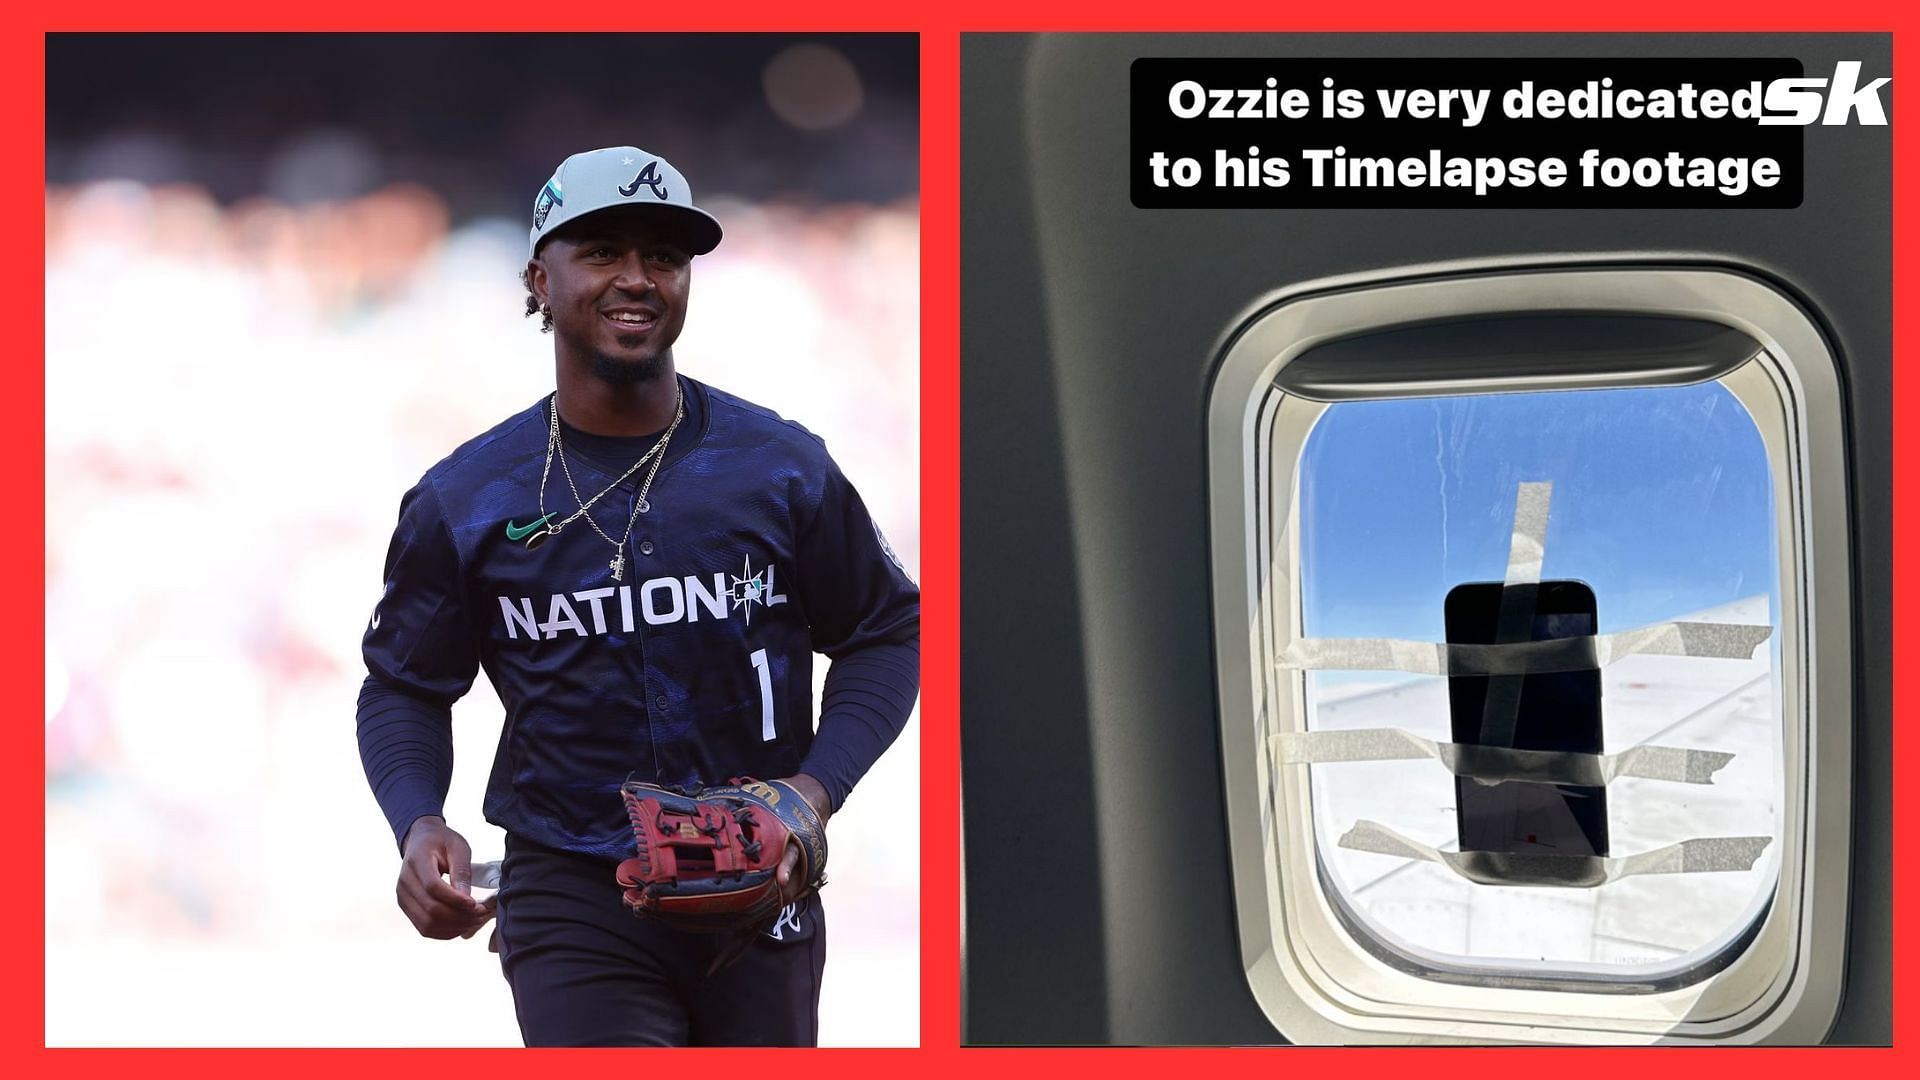 IN PHOTOS: Braves All-Star Ozzie Albies tapes his phone on airplane